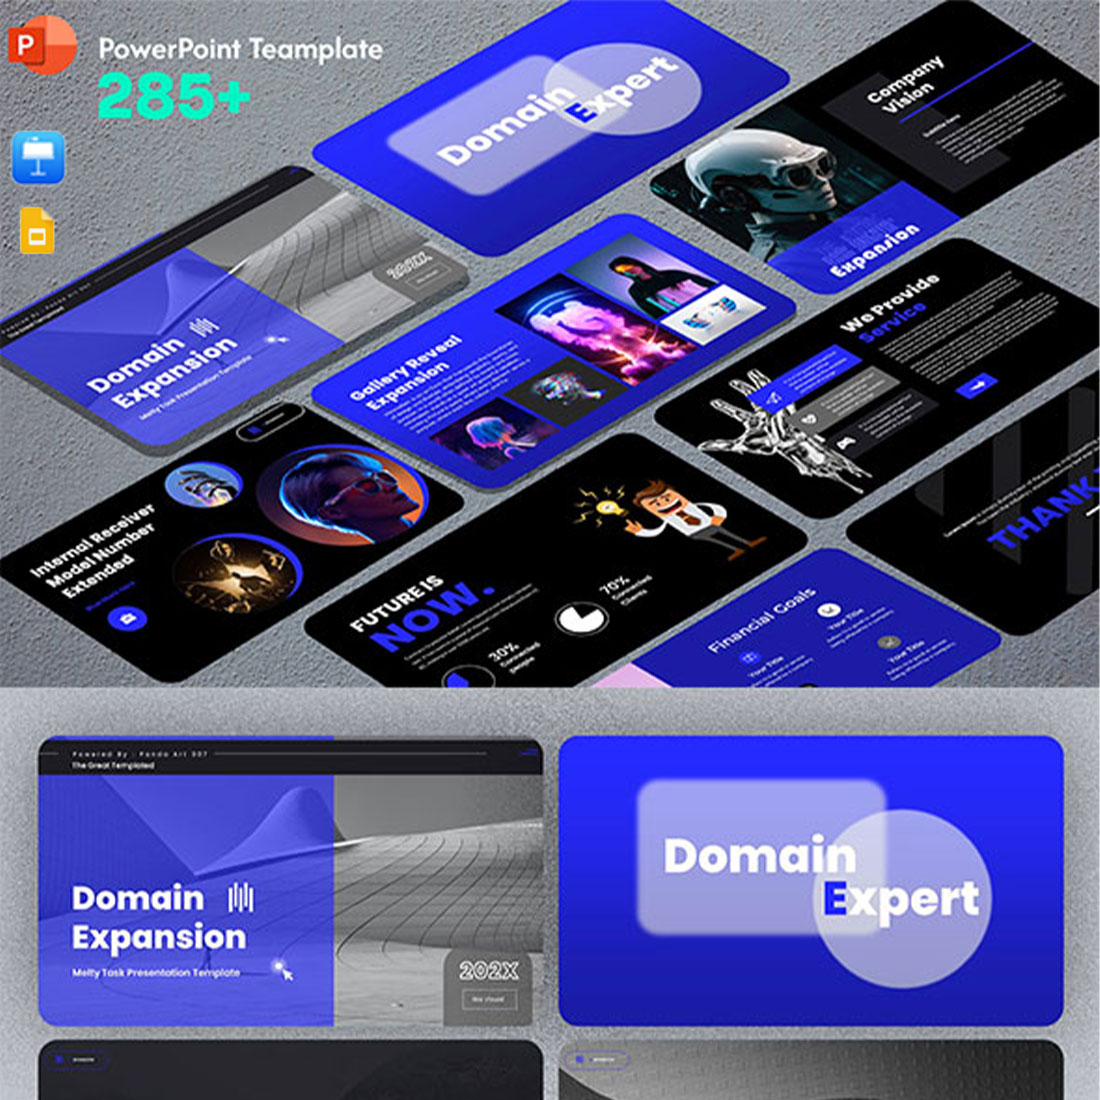 Domain Expansion Explain All File Presentation Template cover image.